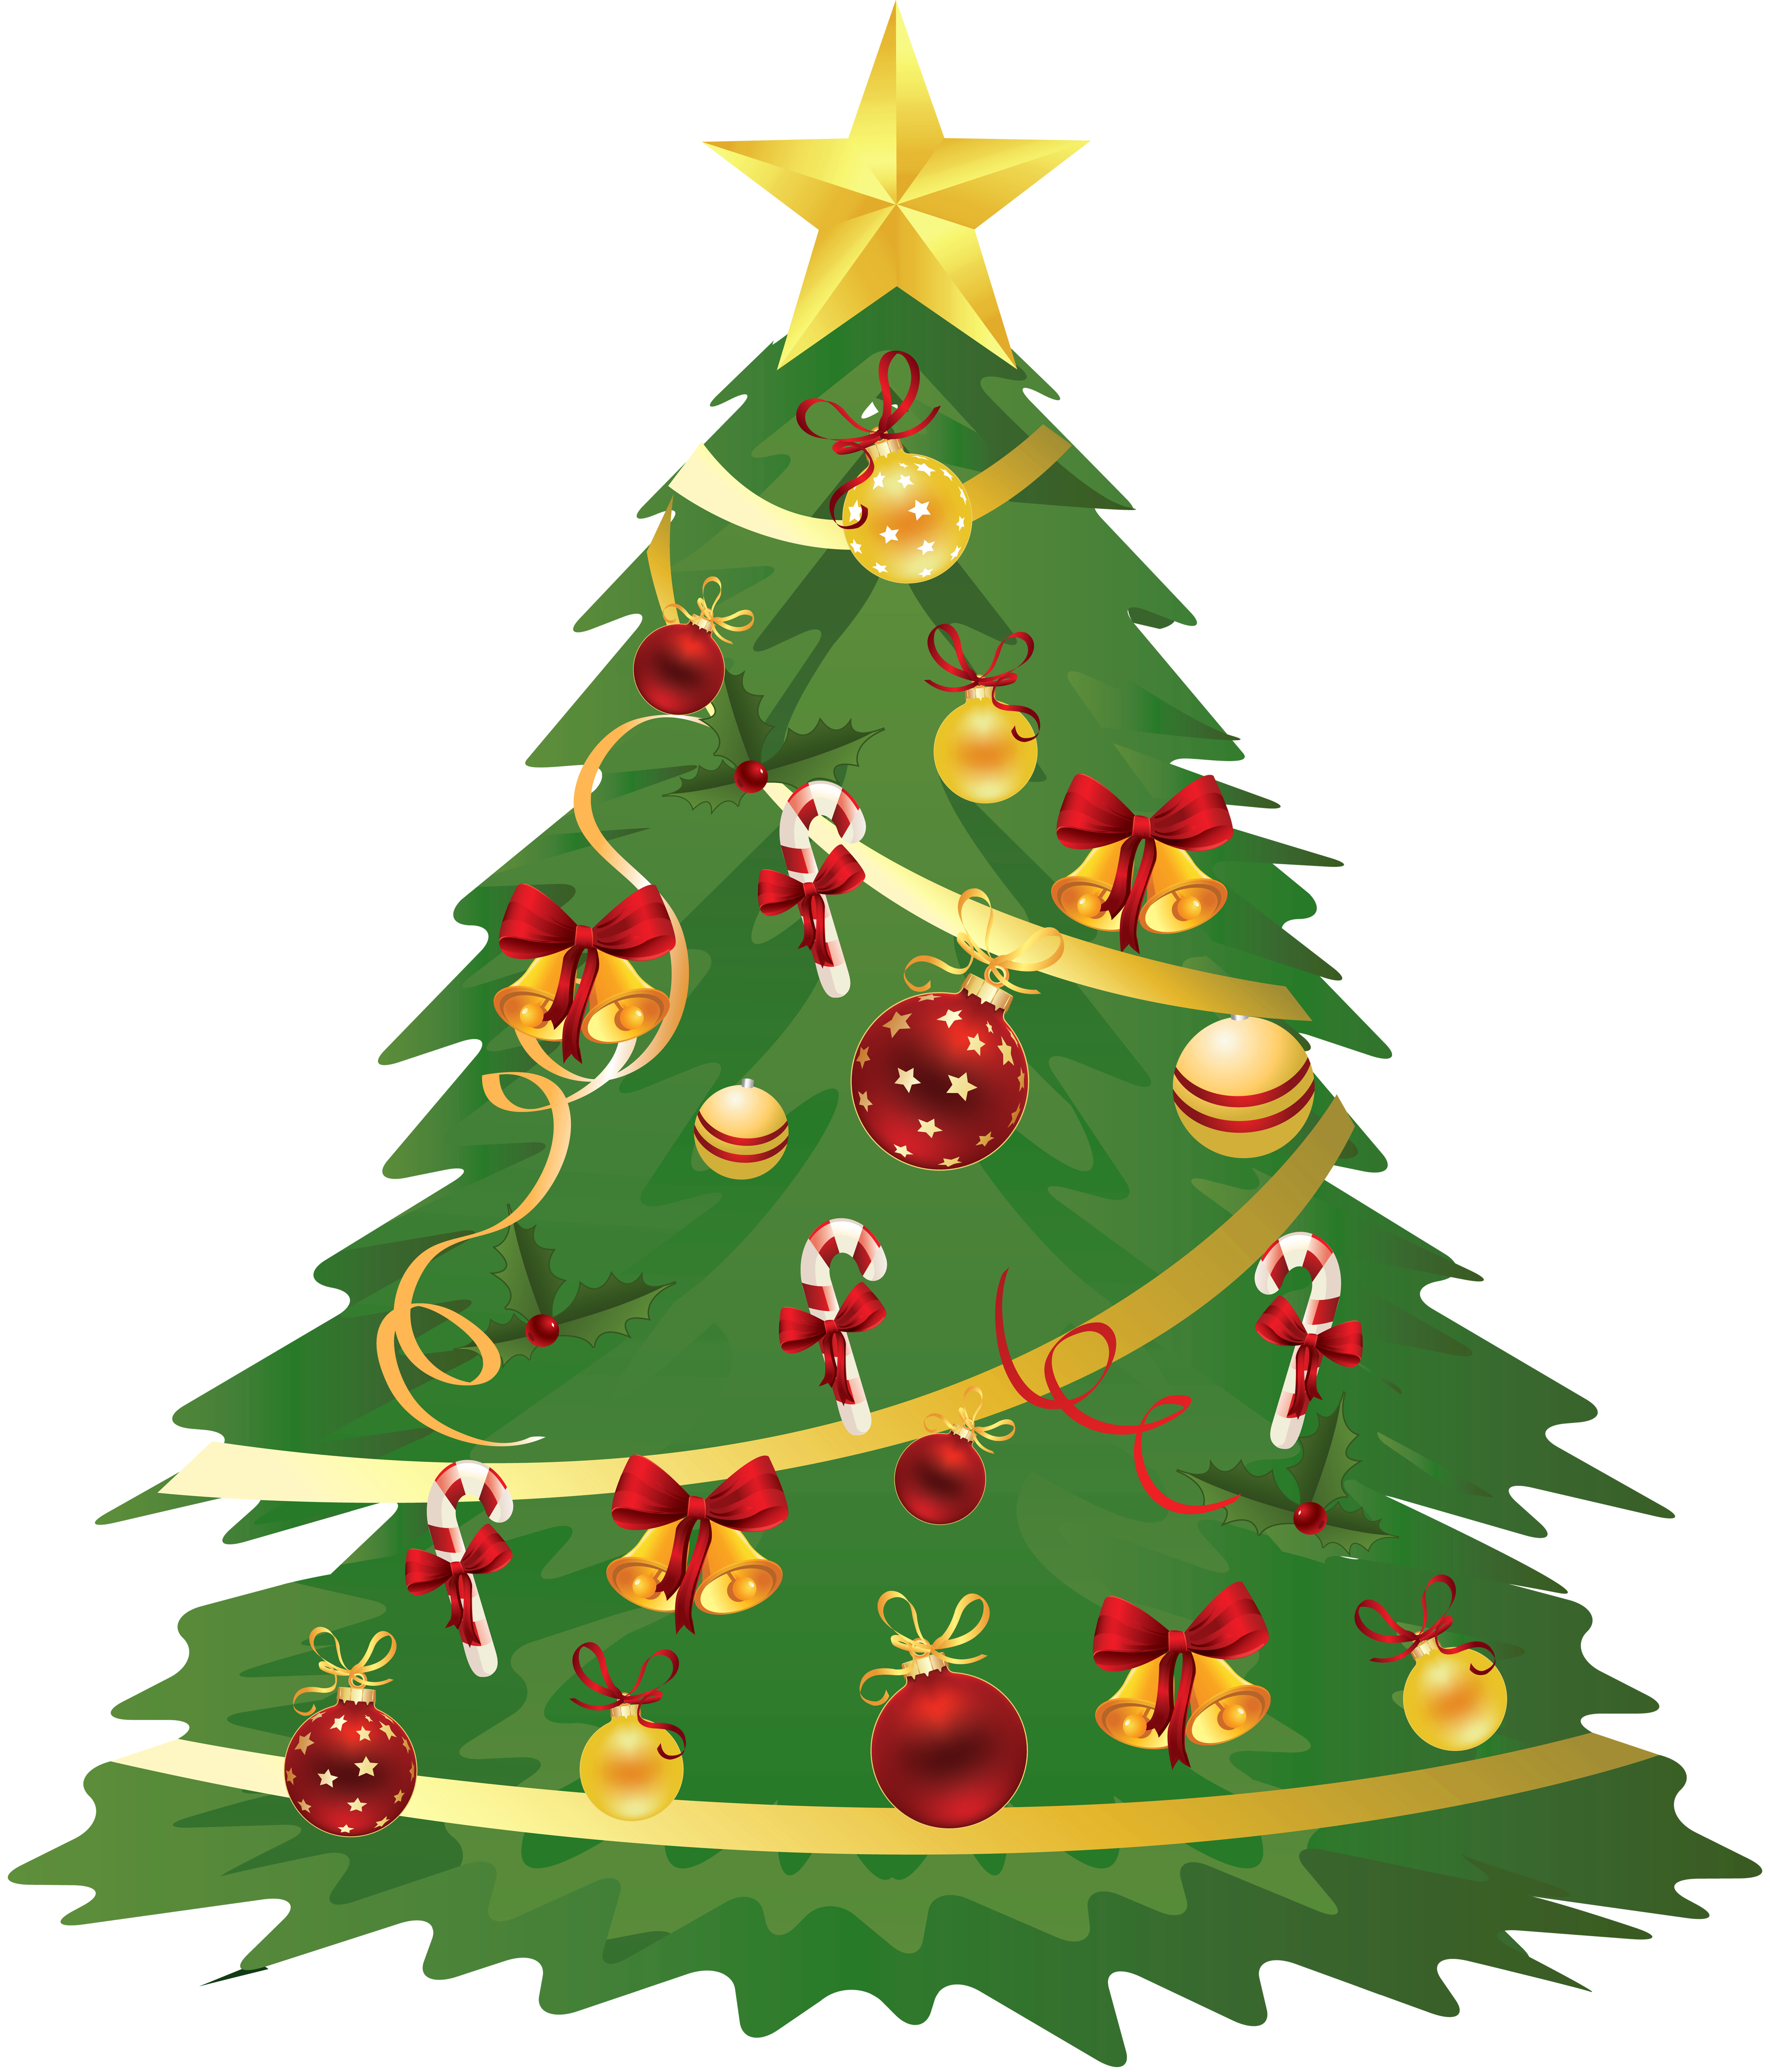 Free Christmas Tree Clip Art Transparent Background, Download Free Christmas Tree Clip Art Transparent Background png images, Free ClipArts on Clipart Library